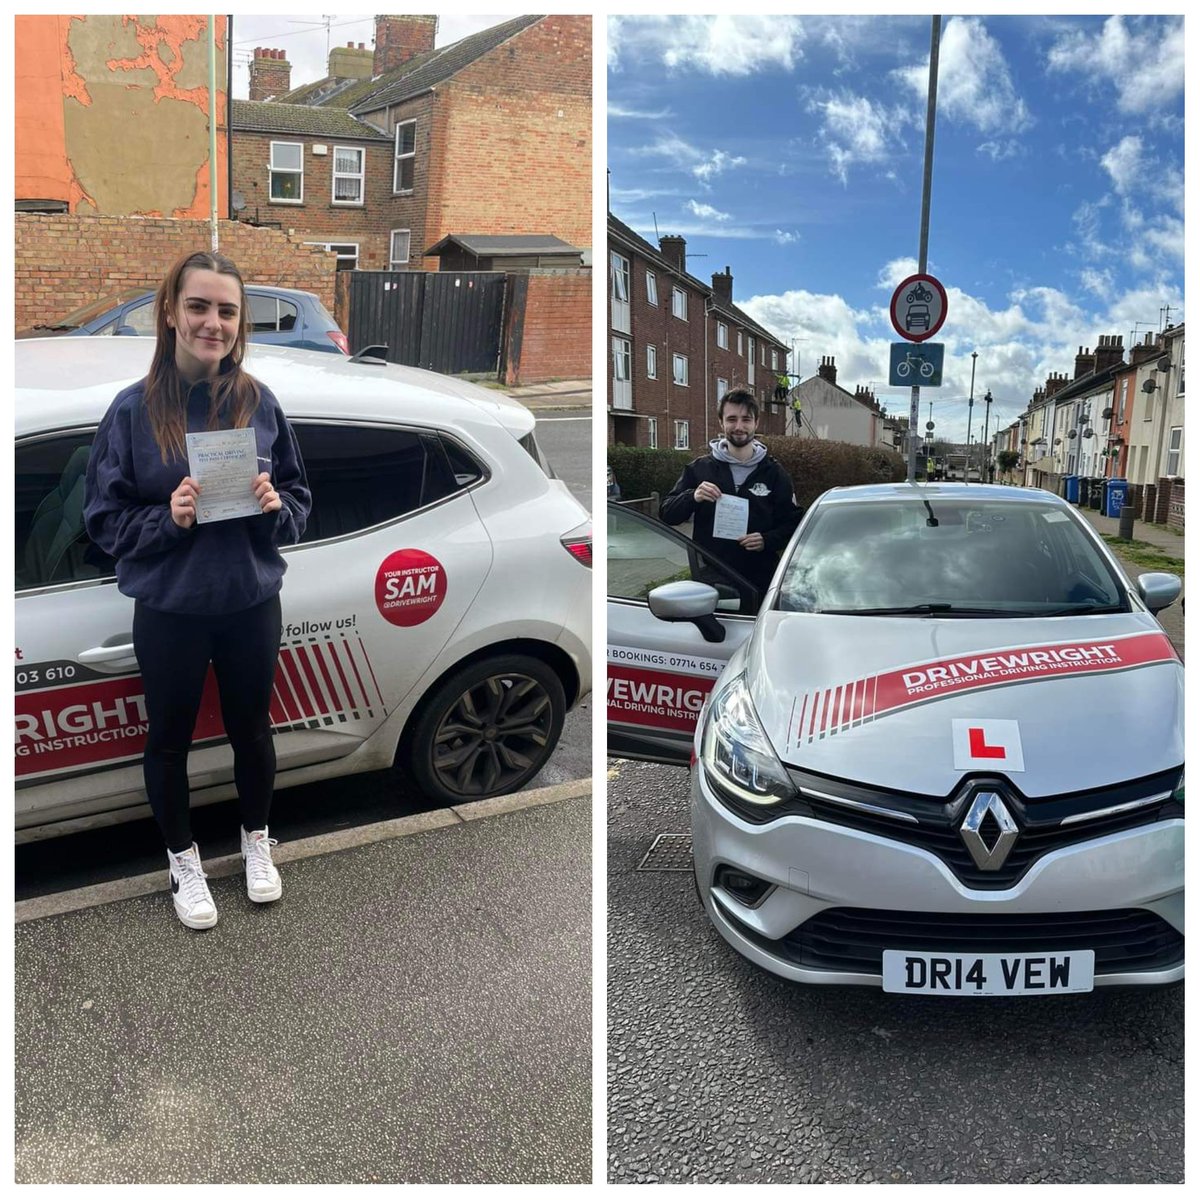 It's a DOUBLE PassDay for TEAM DriveWright 
Congratulations Annaliese and Owen with their Instructors Sam and Toby 
#LearnRightwithDriveWright 
#NKK  #Automatic #Manual #Drivinglessons  #FemaleInstructor #NikkisSquad #SquadGoals  #Lowestoft #Thisgirlcan #Thisgirldid